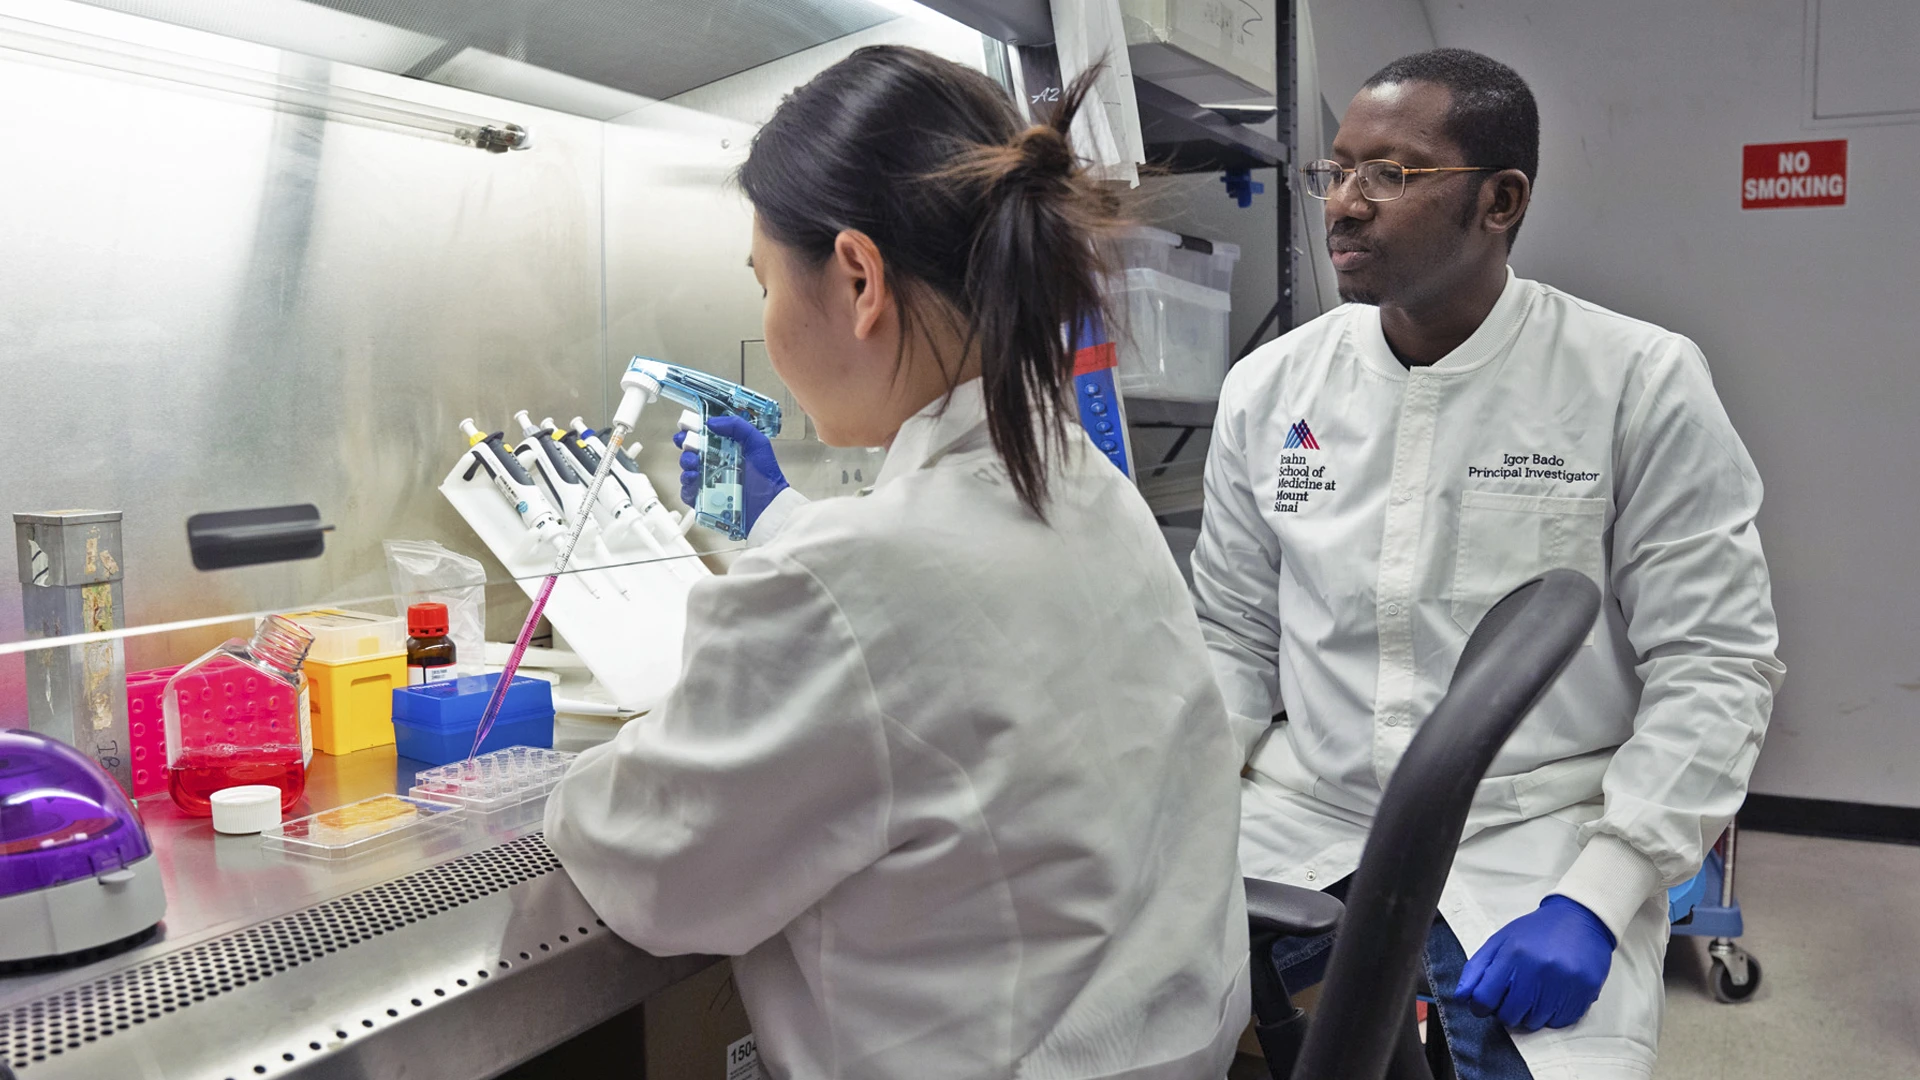 Dr. Bado (right) with lab member Duong (left) at the fume hood, working on cancer cultures. By delving into the basic mechanisms of how cancer cells enter into dormancy, findings can shed light on how these cells later reemerge as metastatic.